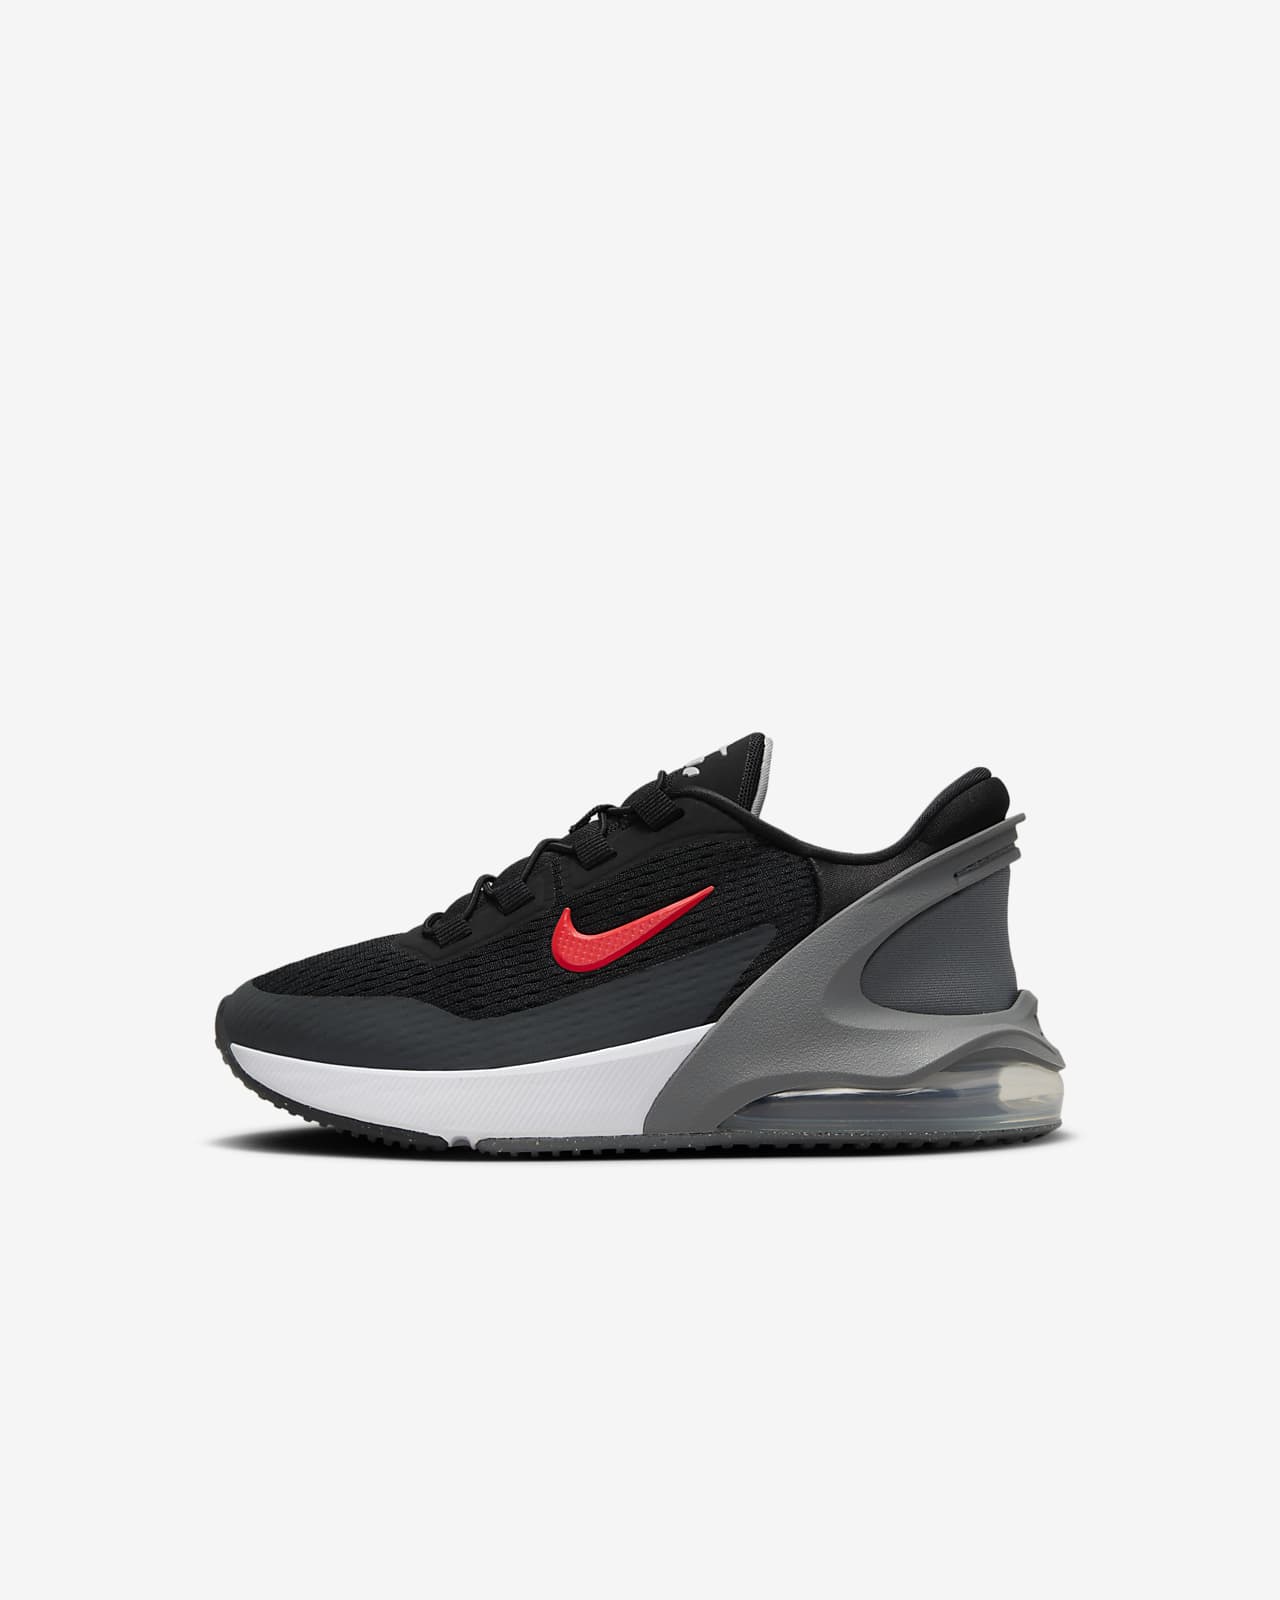 Nike Air Max 270 GO Younger Kids' Easy On/Off Shoes